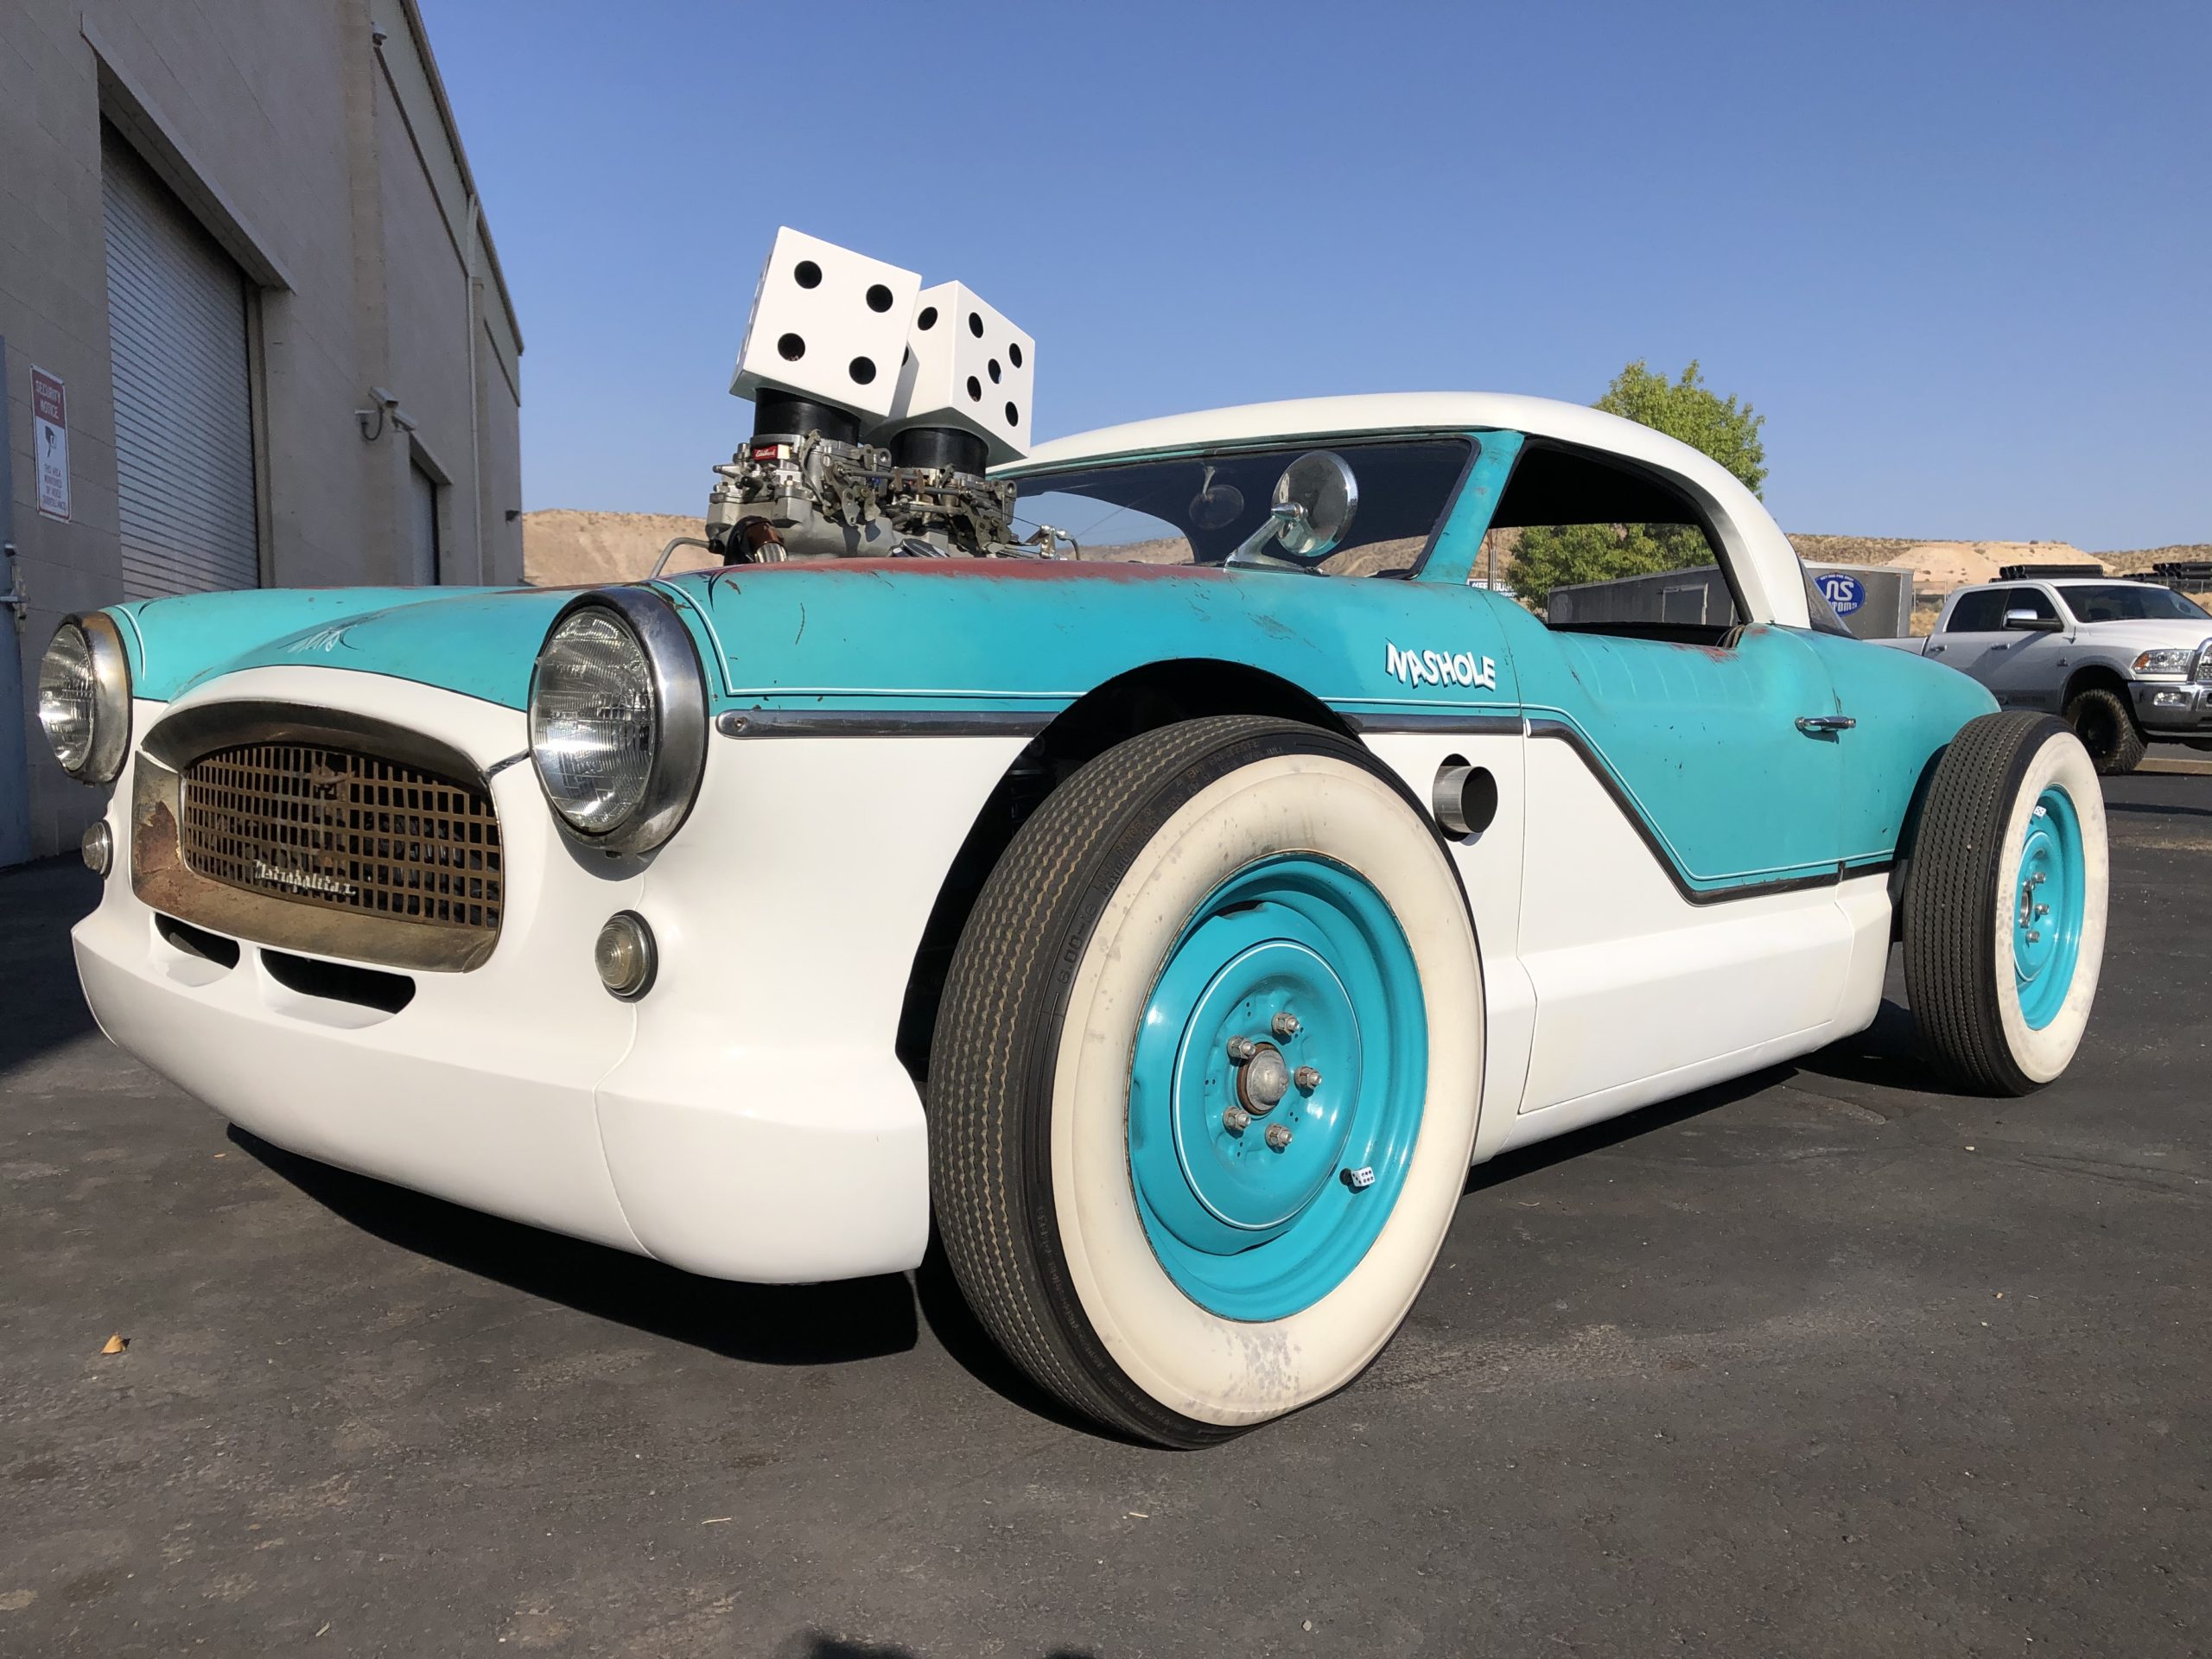 Local custom car builder wins Hot Wheels competition, gets 'rat'  immortalized as a toy – St George News